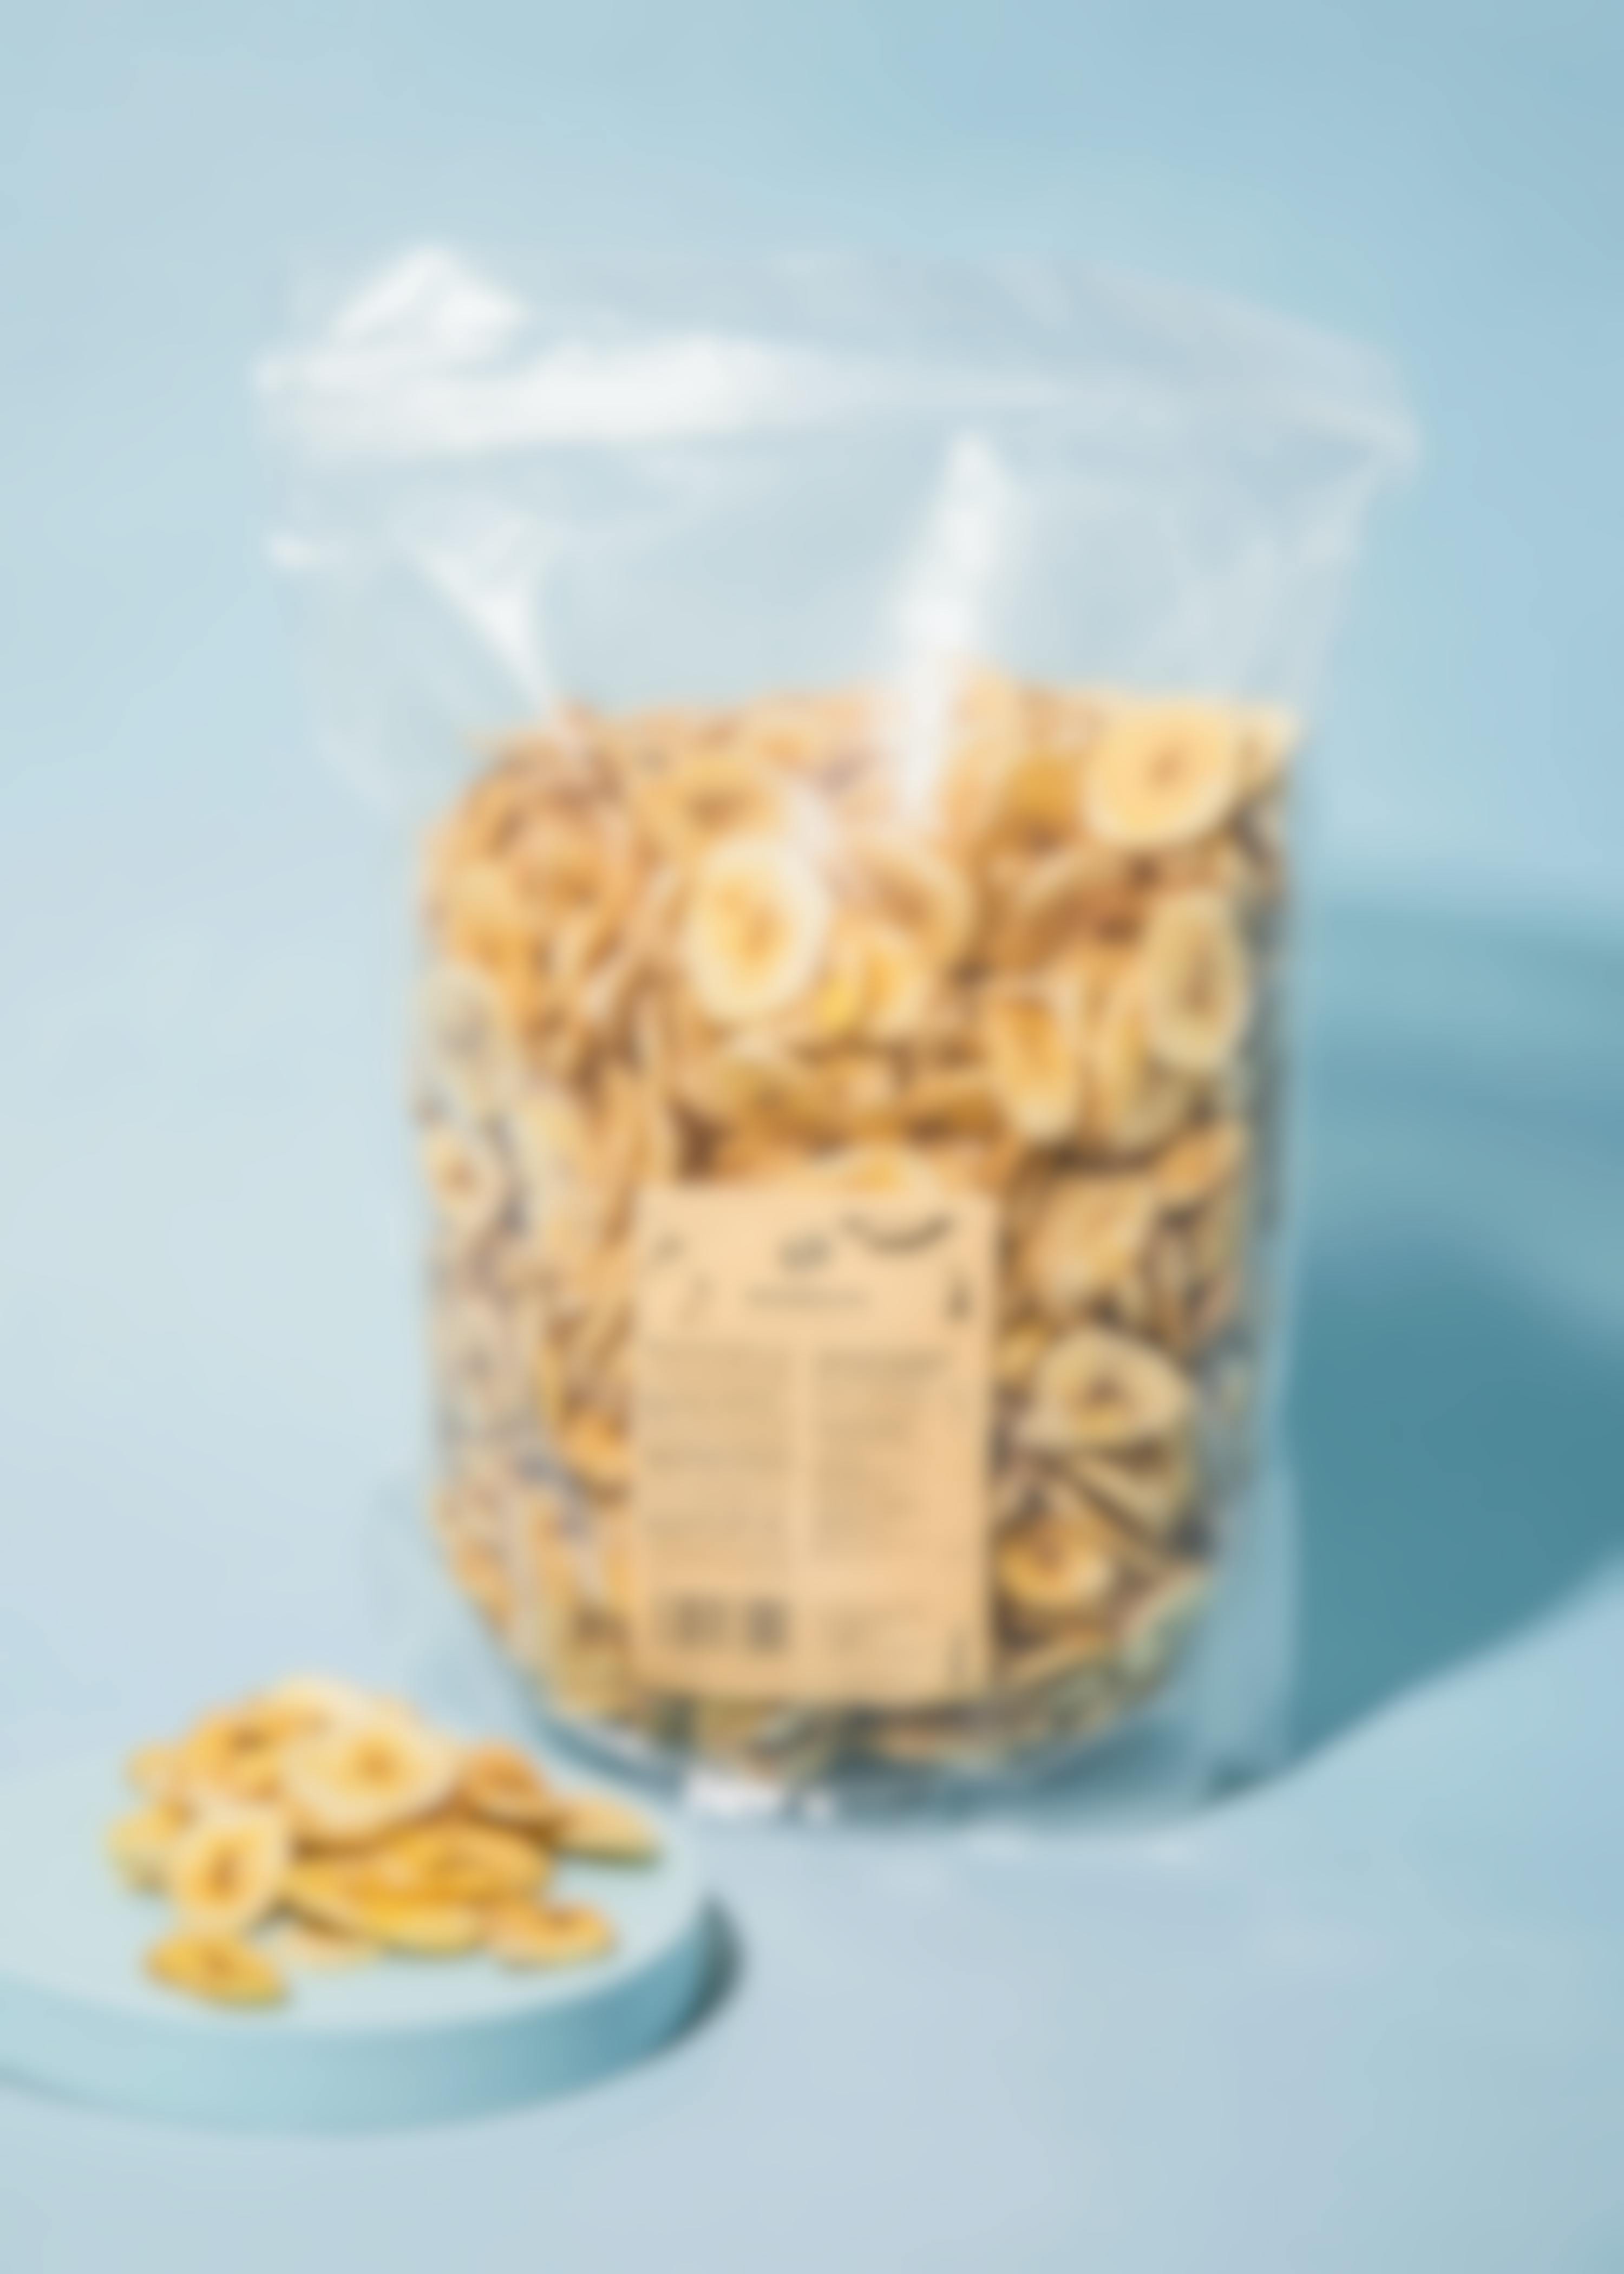 Banana chips with no added sugar 1kg